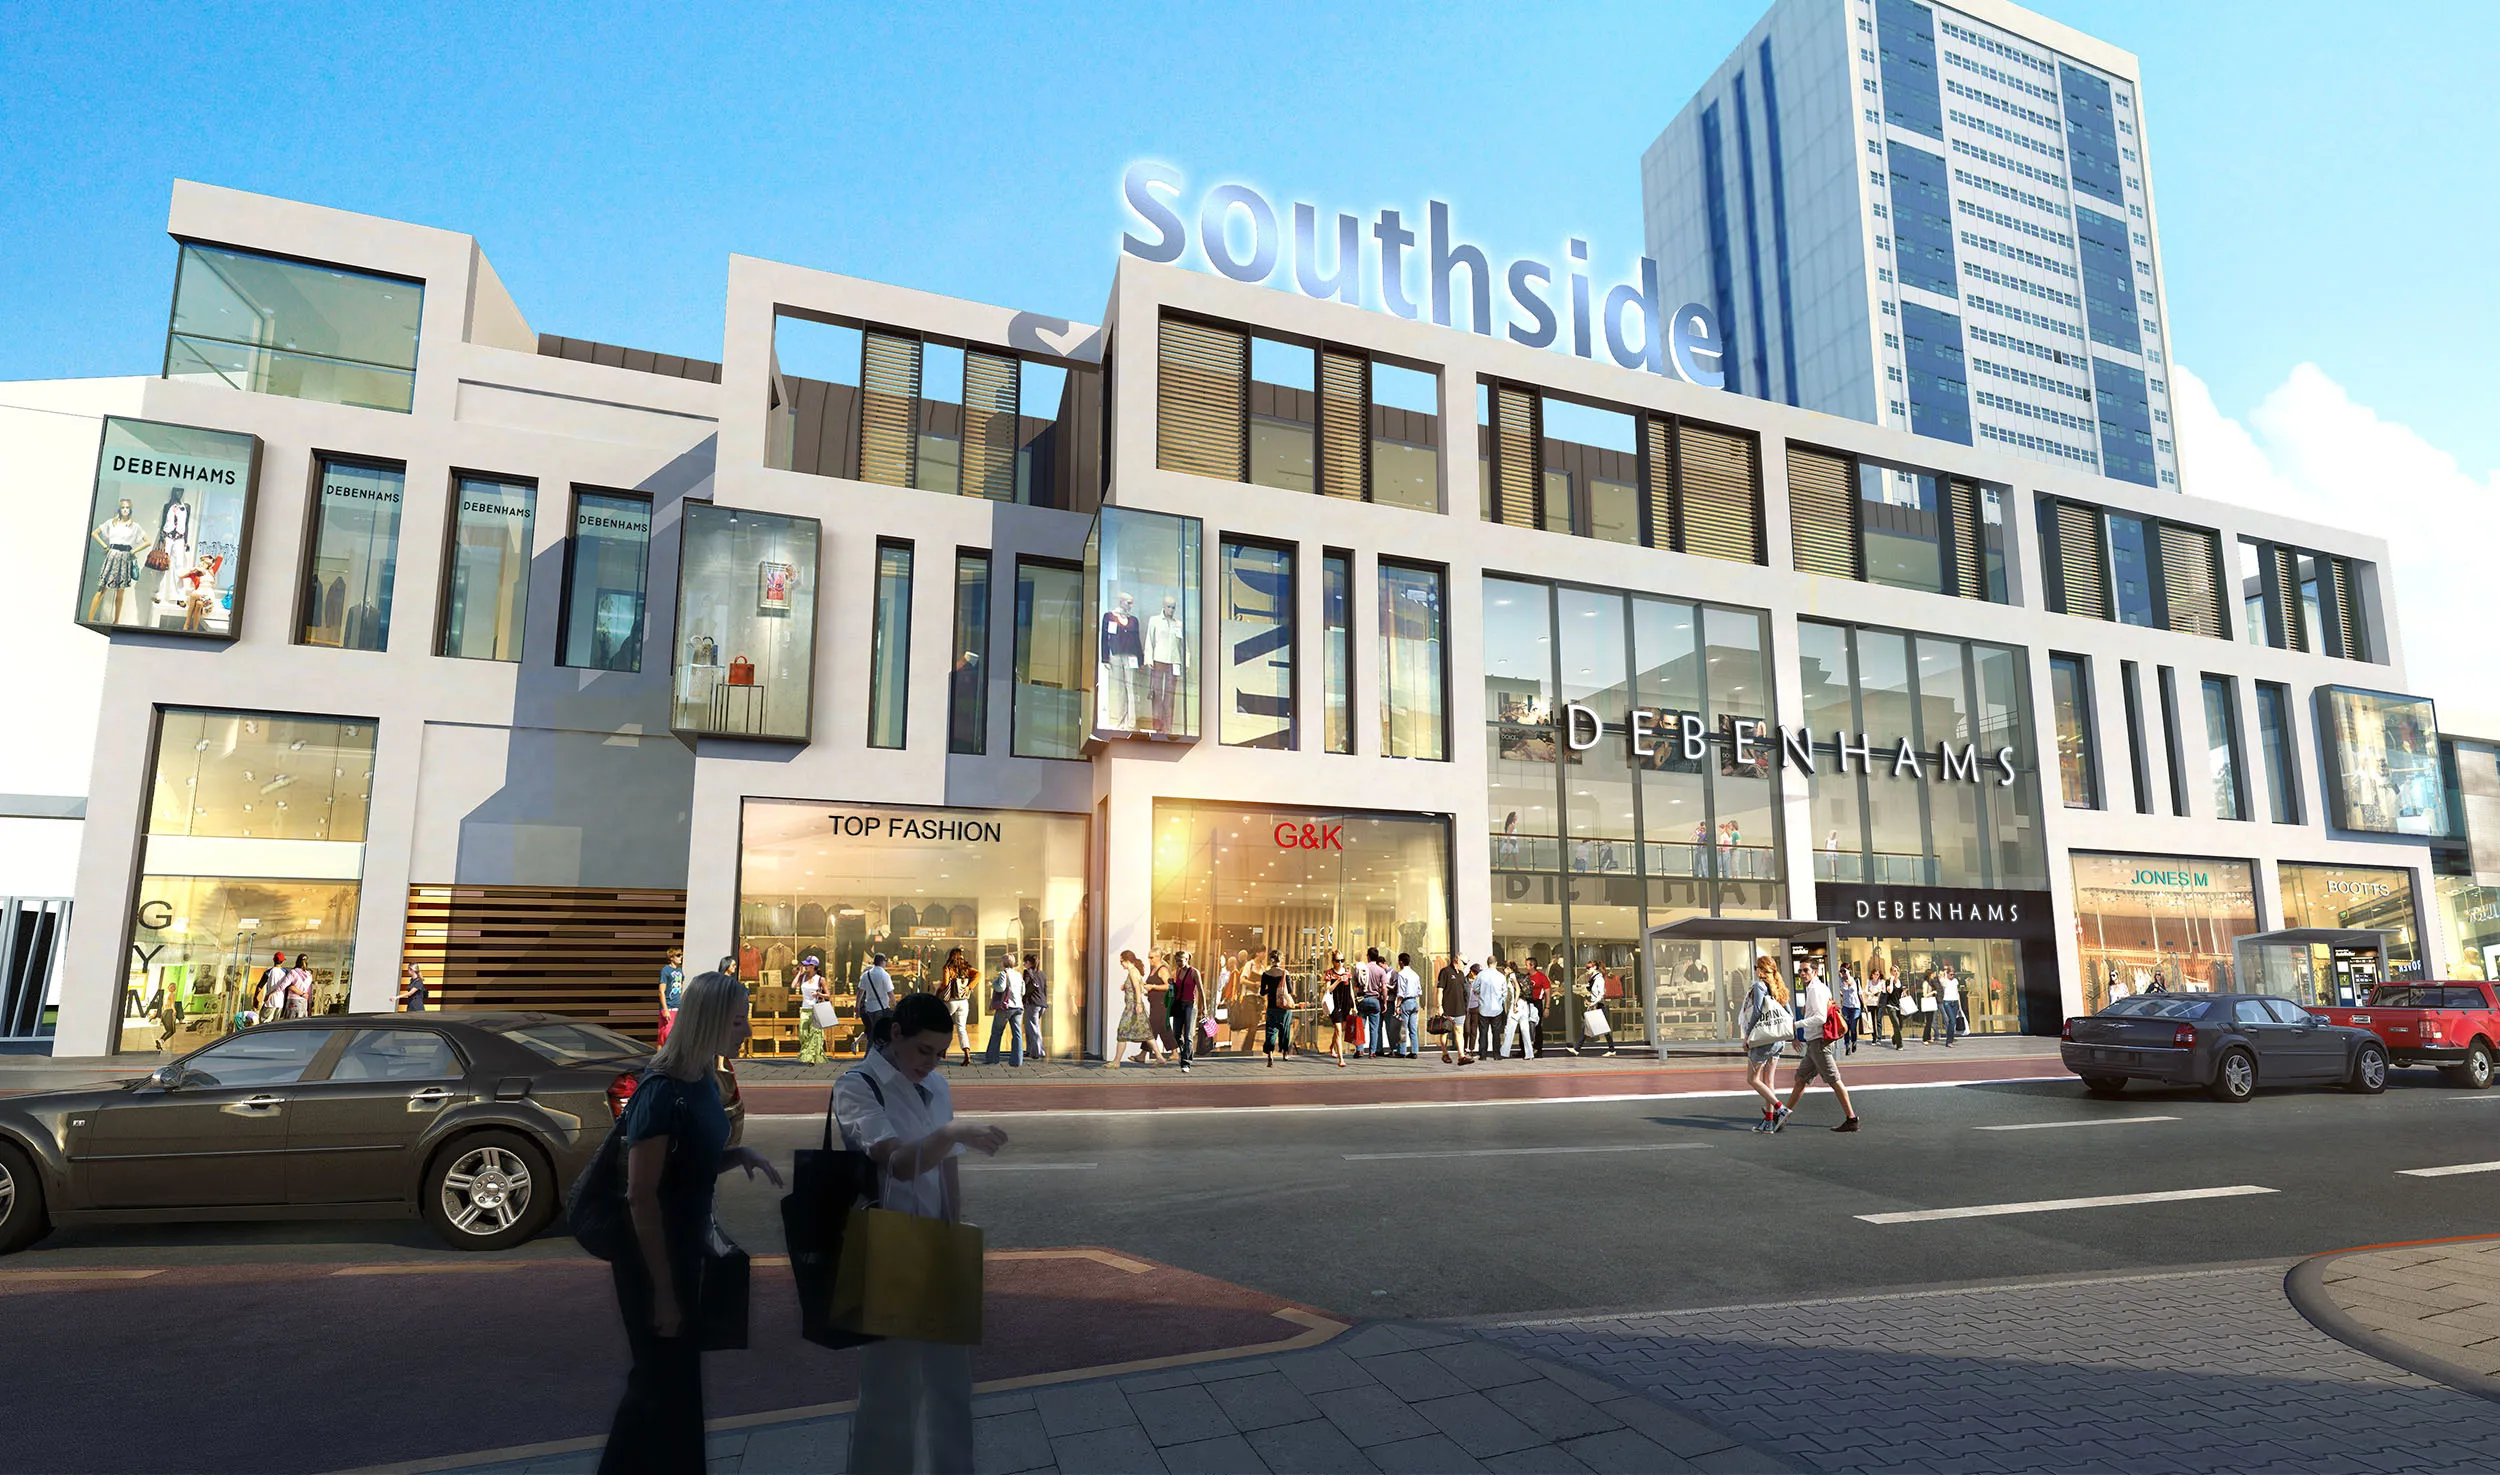 Southside Shopping Centre in United Kingdom, europe | Sporting Equipment,Handbags,Shoes,Clothes,Home Decor,Sportswear,Travel Bags,Swimwear - Country Helper